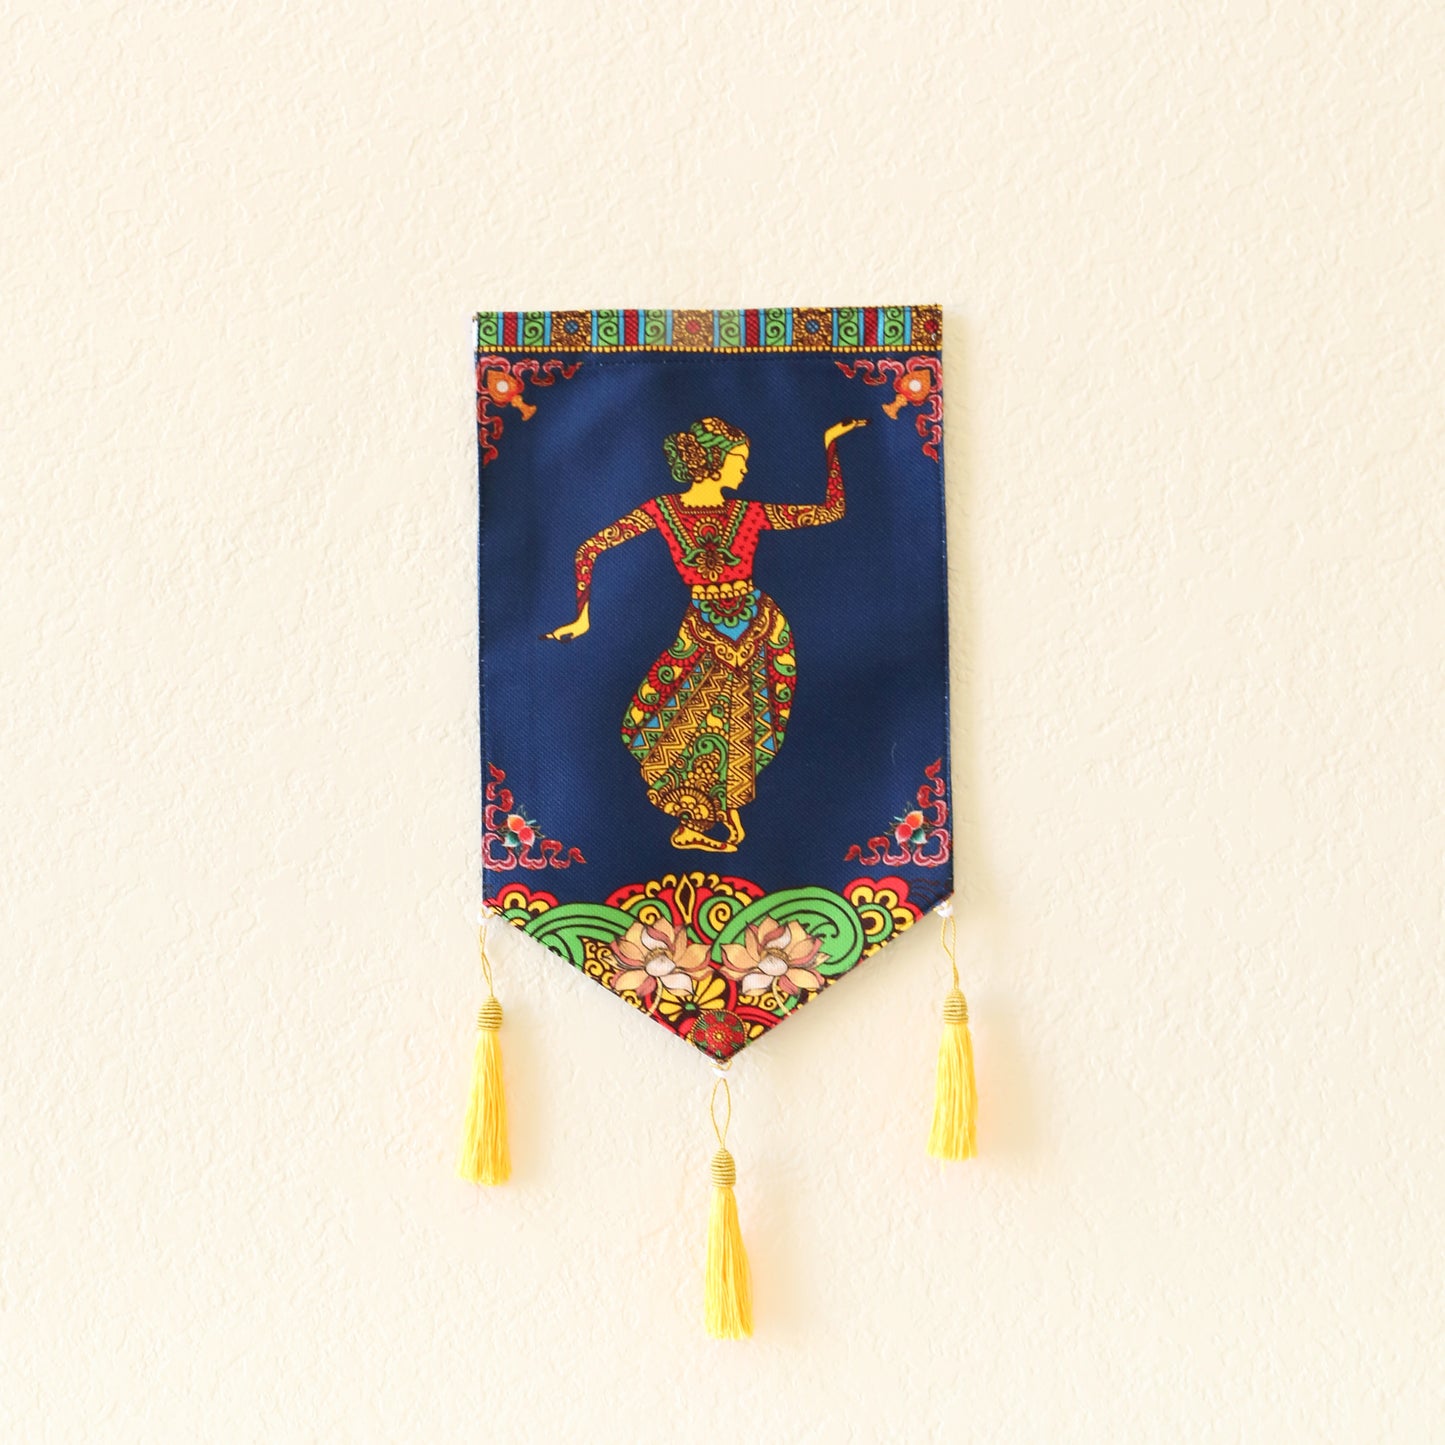 Thai Style Buddhist Om Symbol Small Canvas Tapestry Wall Hanging Tassels, 9.5"X16", Asian Chinese Indian Wall Art